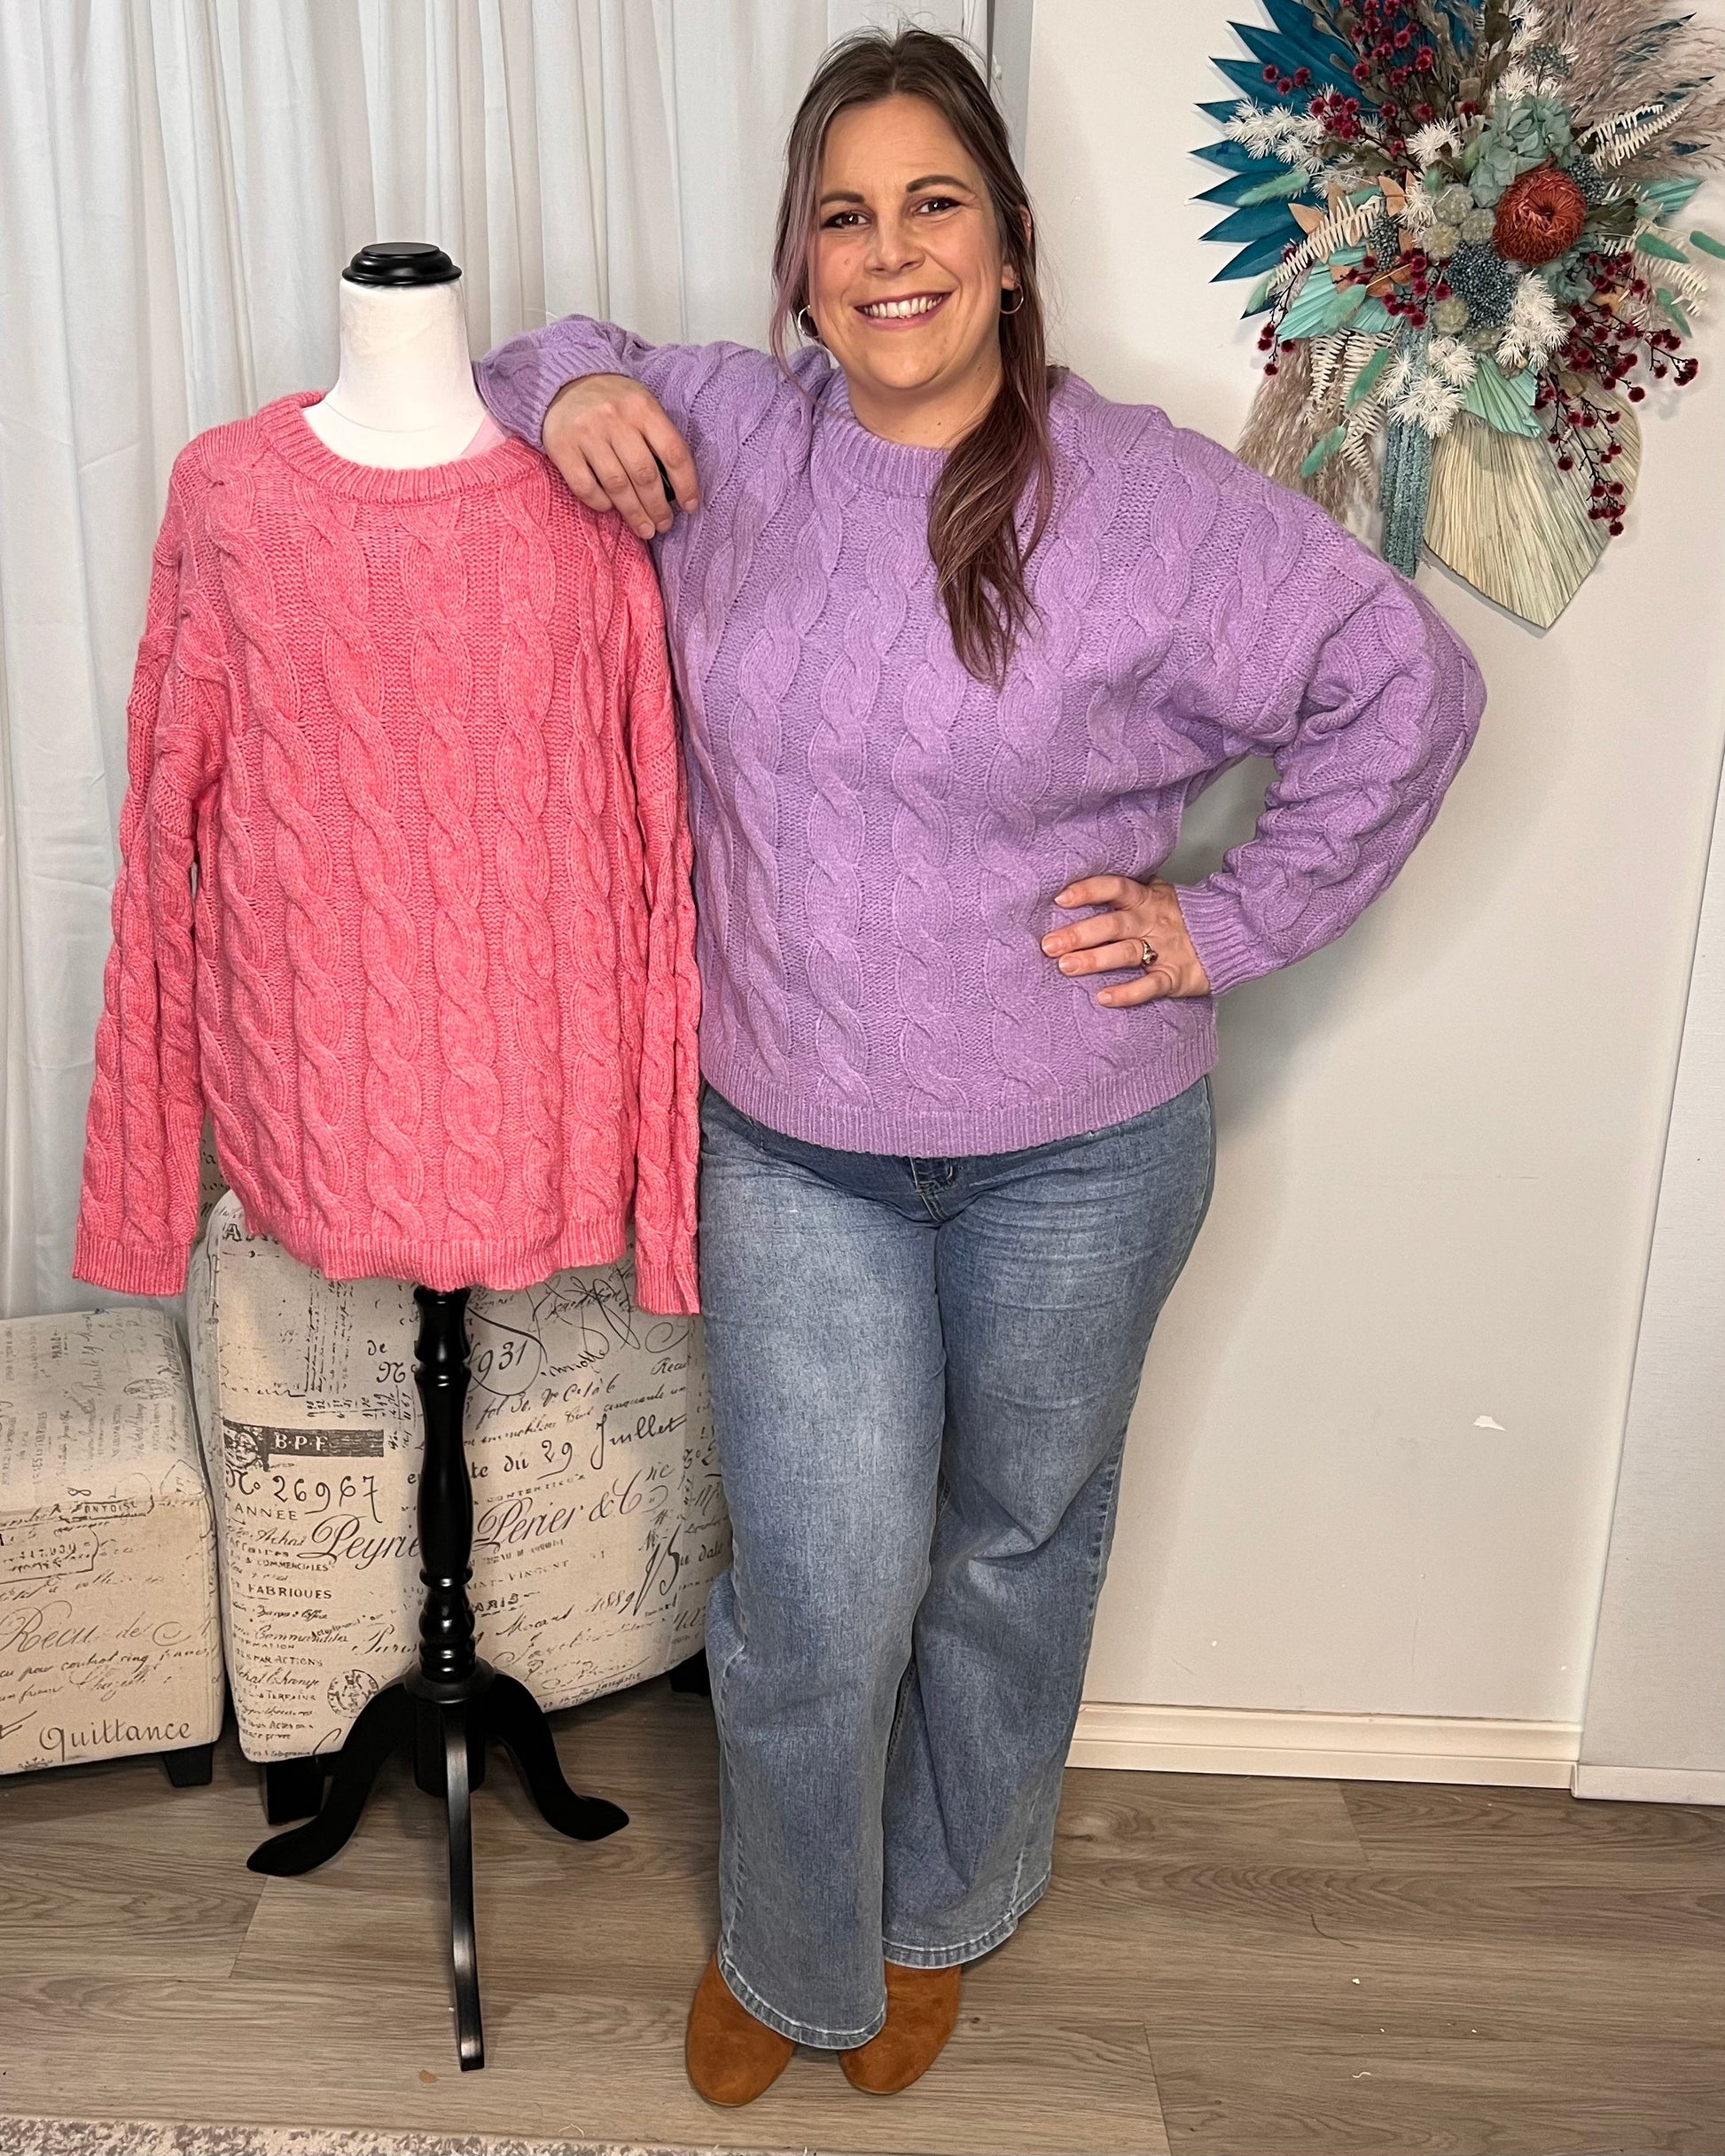 Felicity Cable Knit Jumper - Pink | Sass Clothing | This winter cable knit is brings a pop of colour to your winter wardrobe. It comes in pink or purple. Perfect for cold weather, this top features classic cable knit 